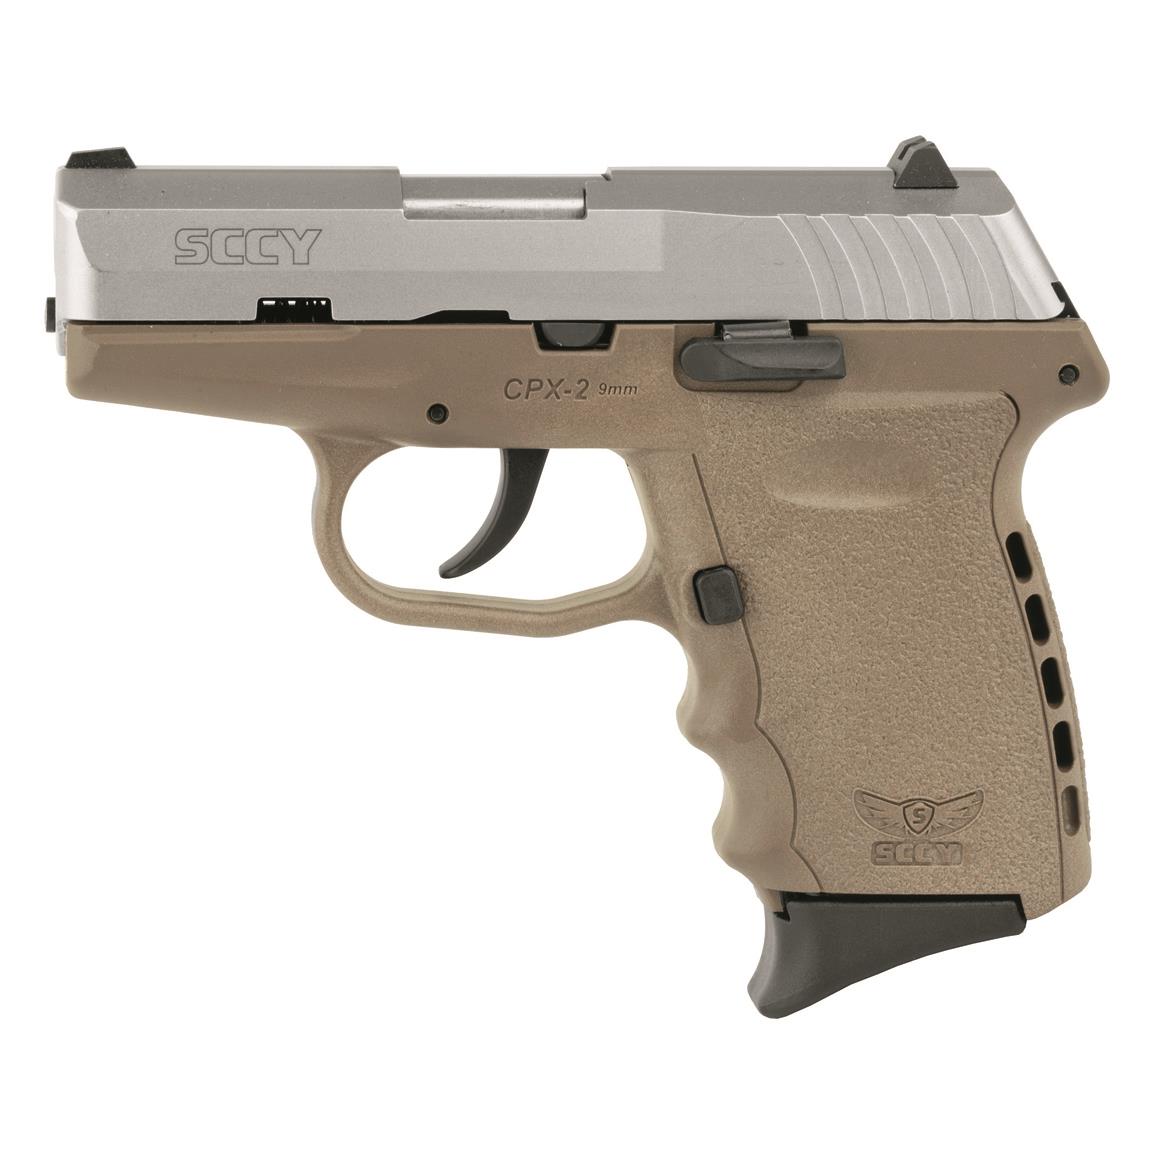 SCCY CPX-2, Semi-automatic, 9mm, 3.1" Barrel, FDE/Stainless, 10+1 Rounds